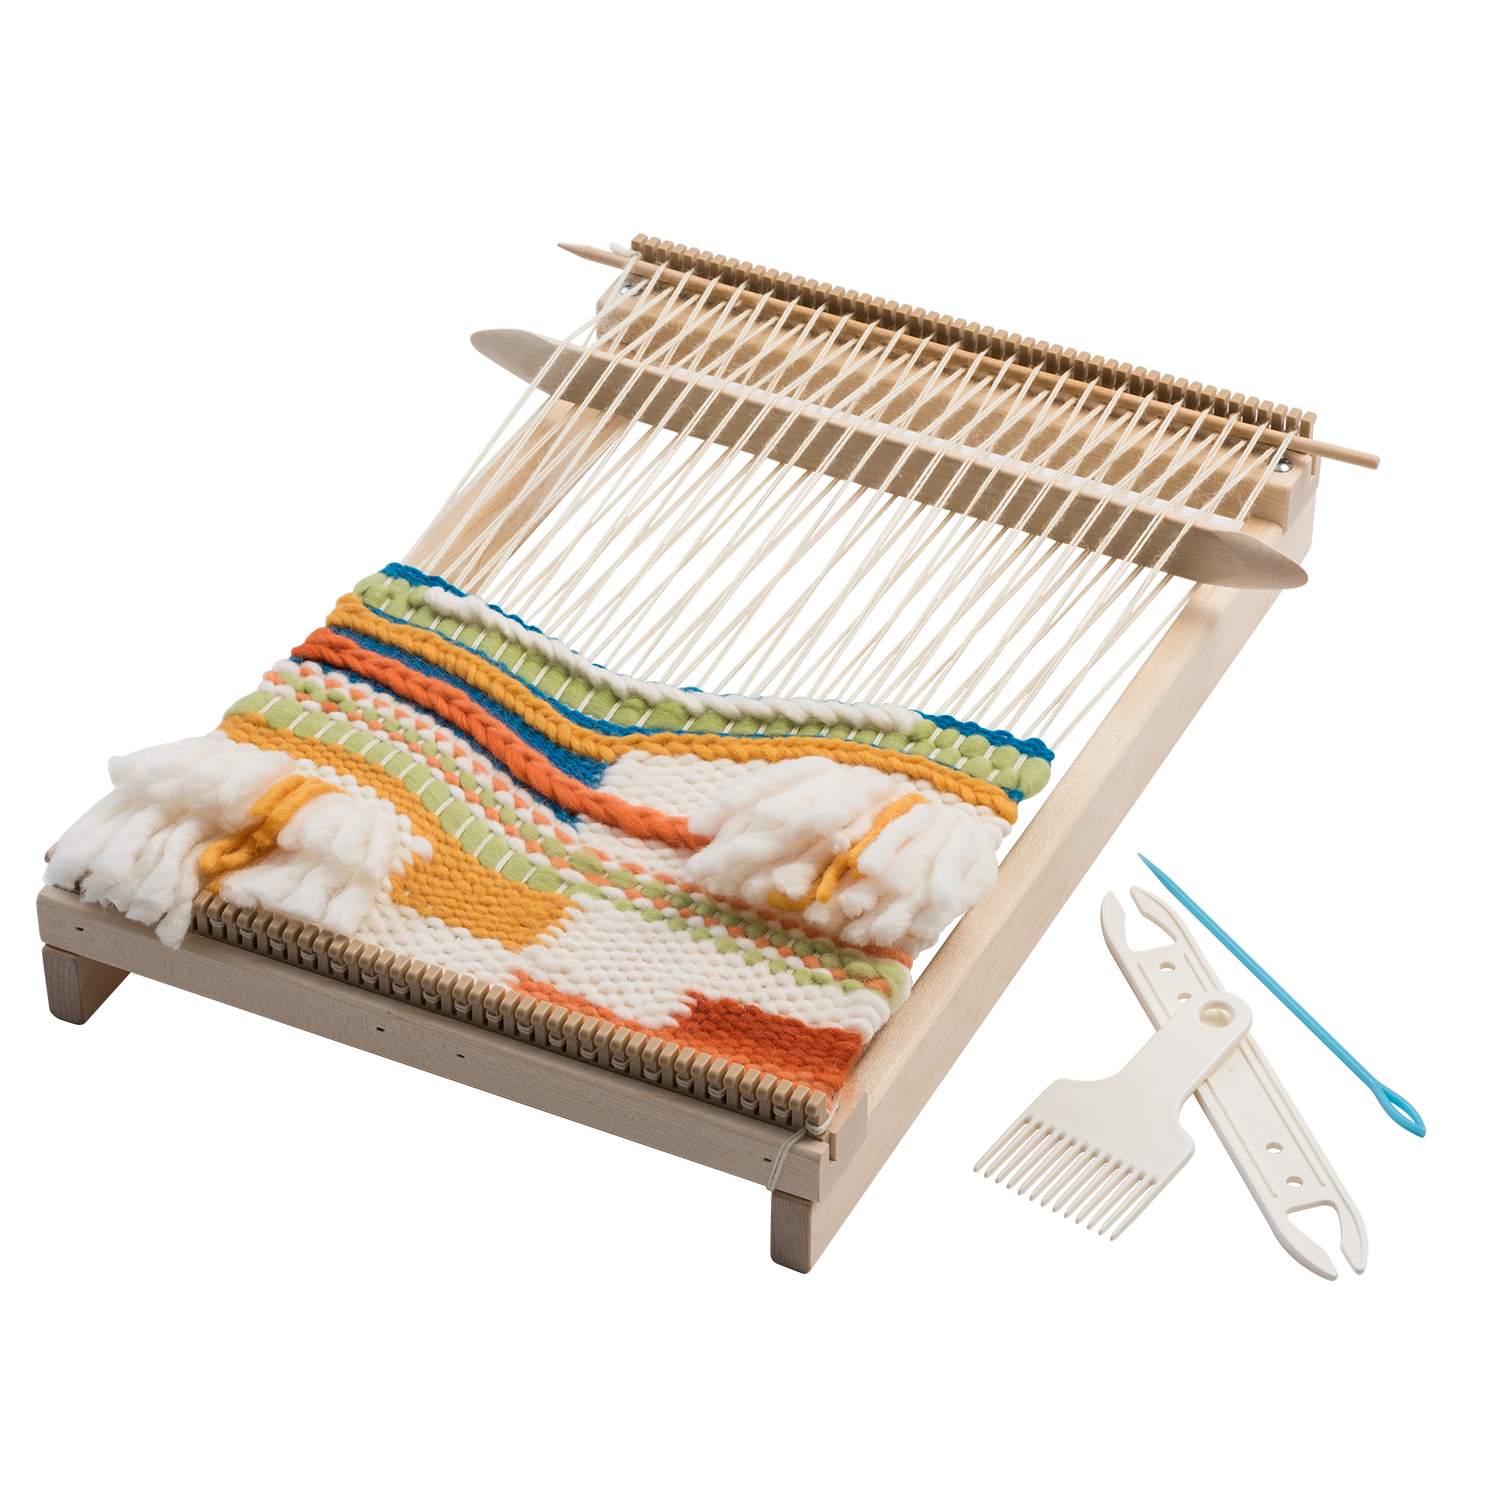 X Large Weaving Loom Kit, Also Known as Tapestry Weave Loom Lap